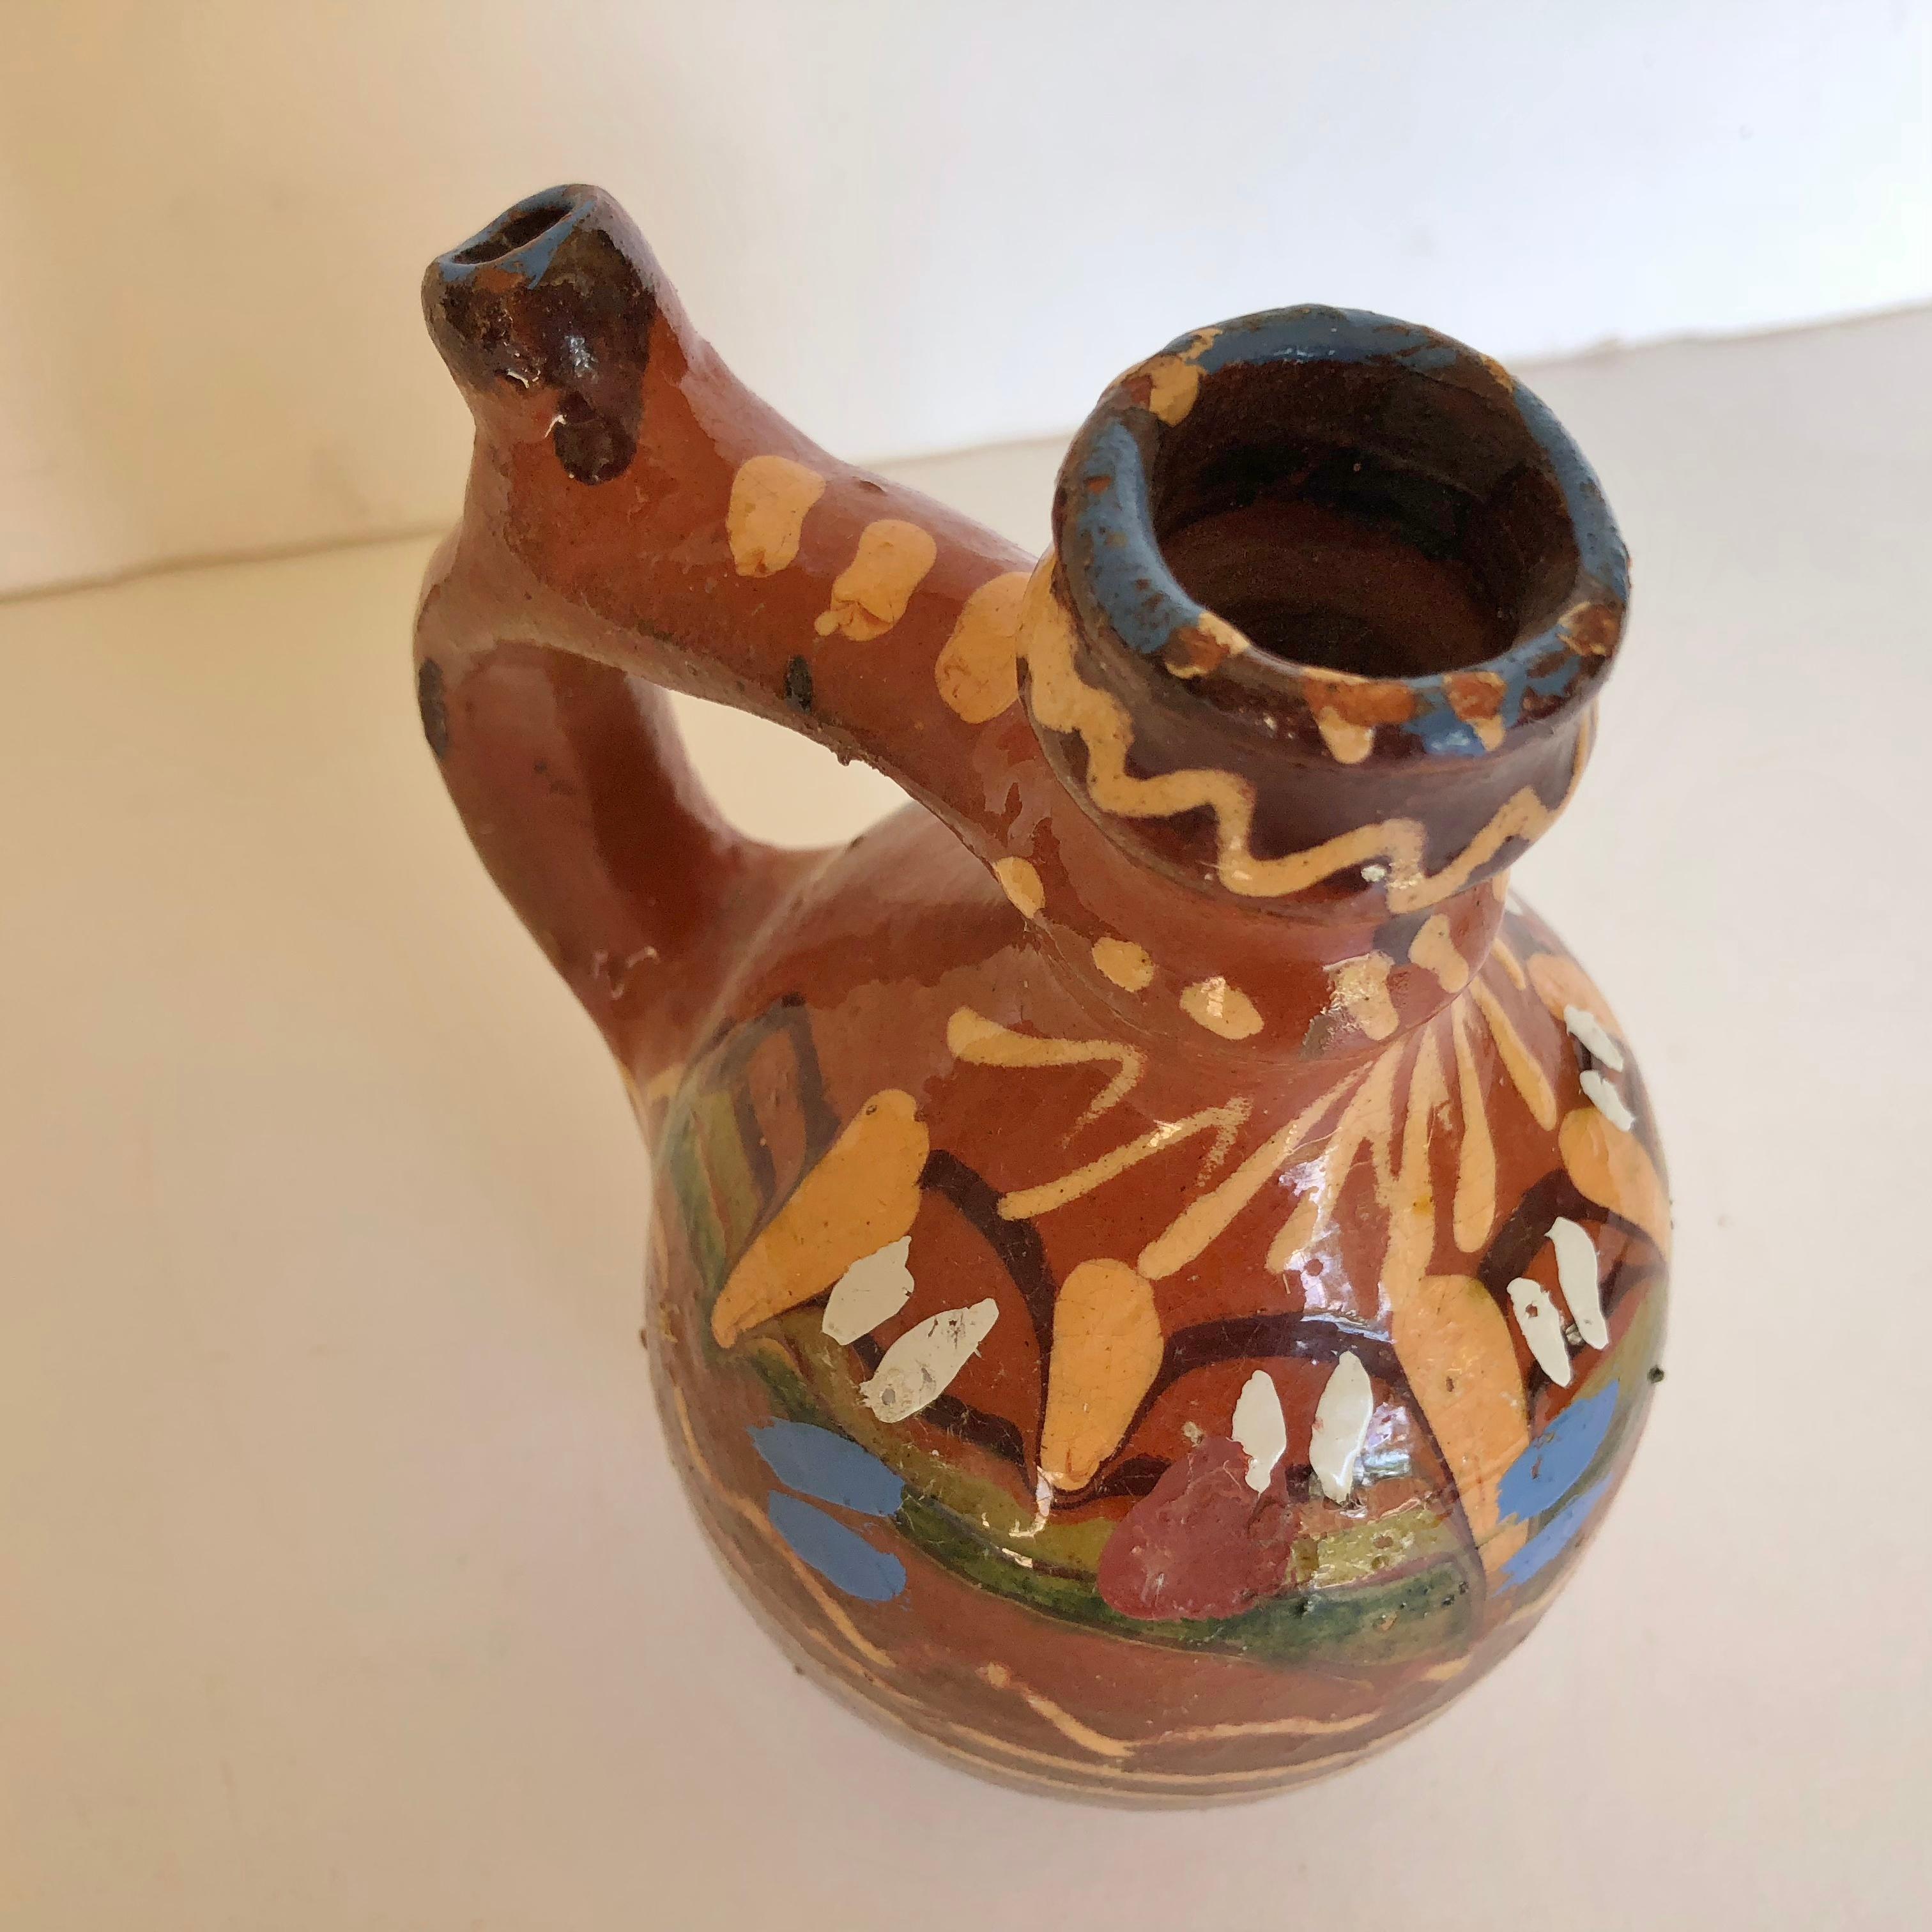 Group of Three Terracotta Pottery Folk Art Carafes from Transylvania, Serbia In Good Condition For Sale In Glen Ellyn, IL